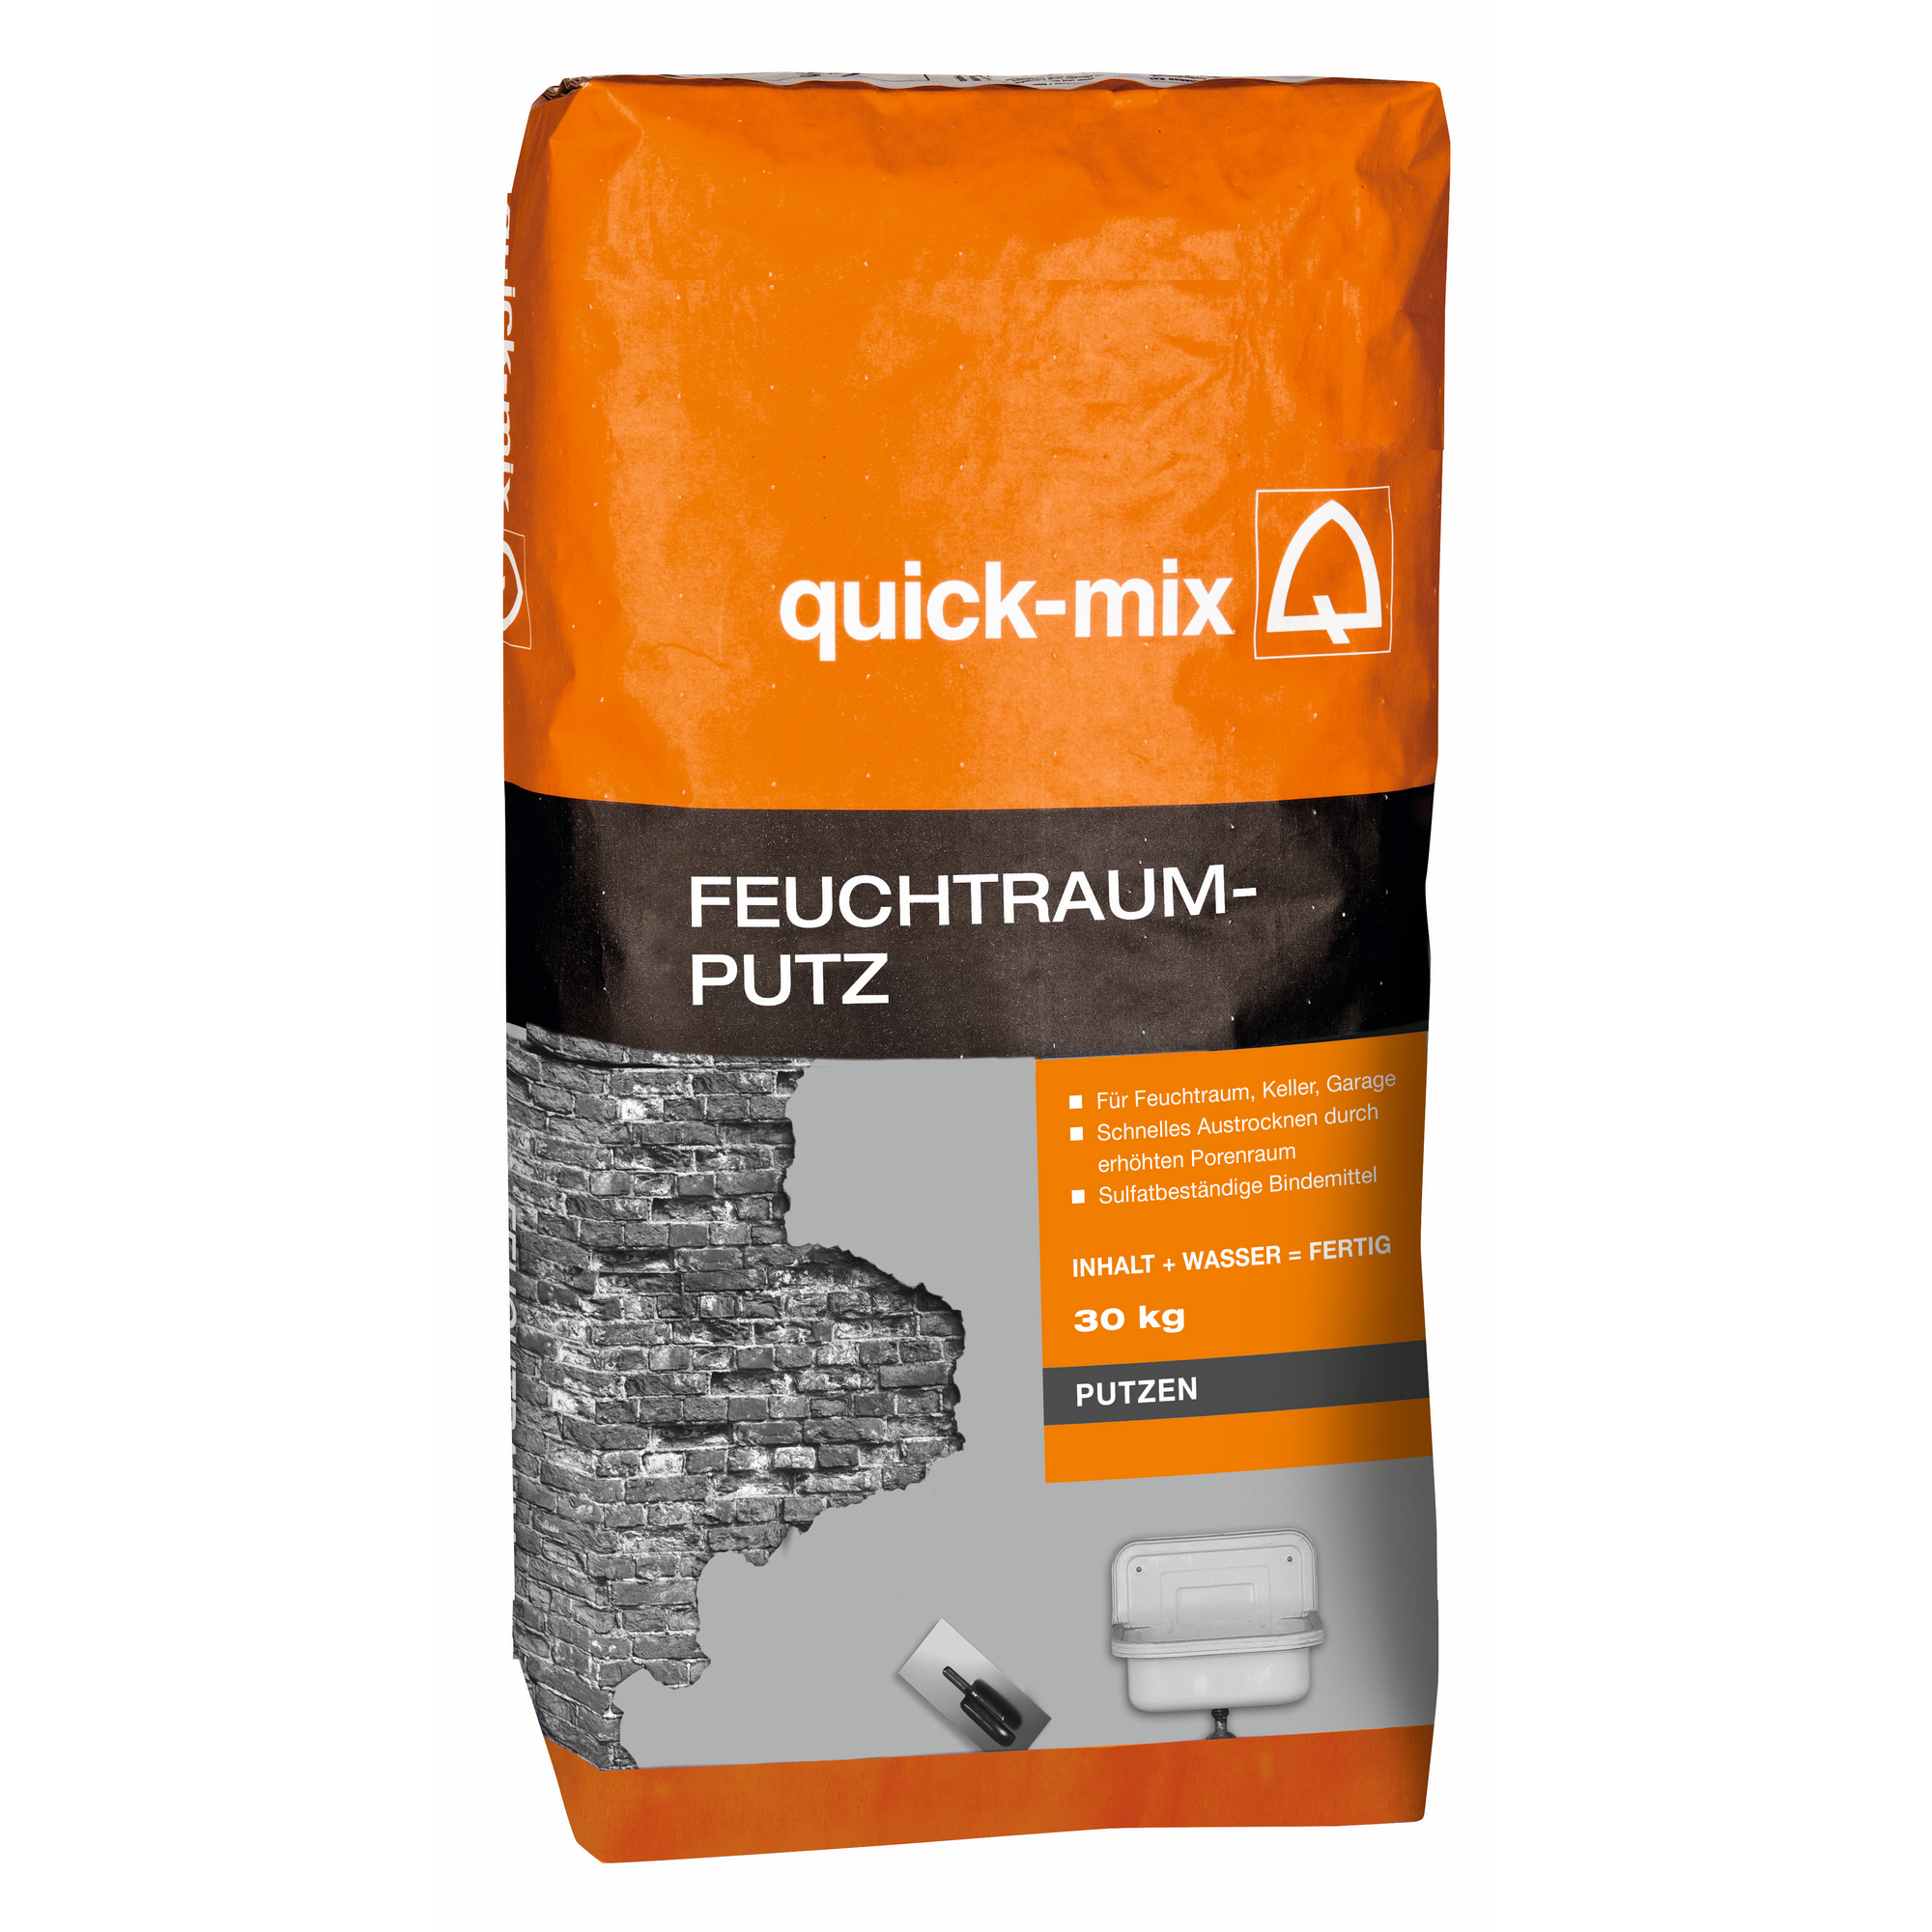 Feuchtraumputz 30 kg + product picture